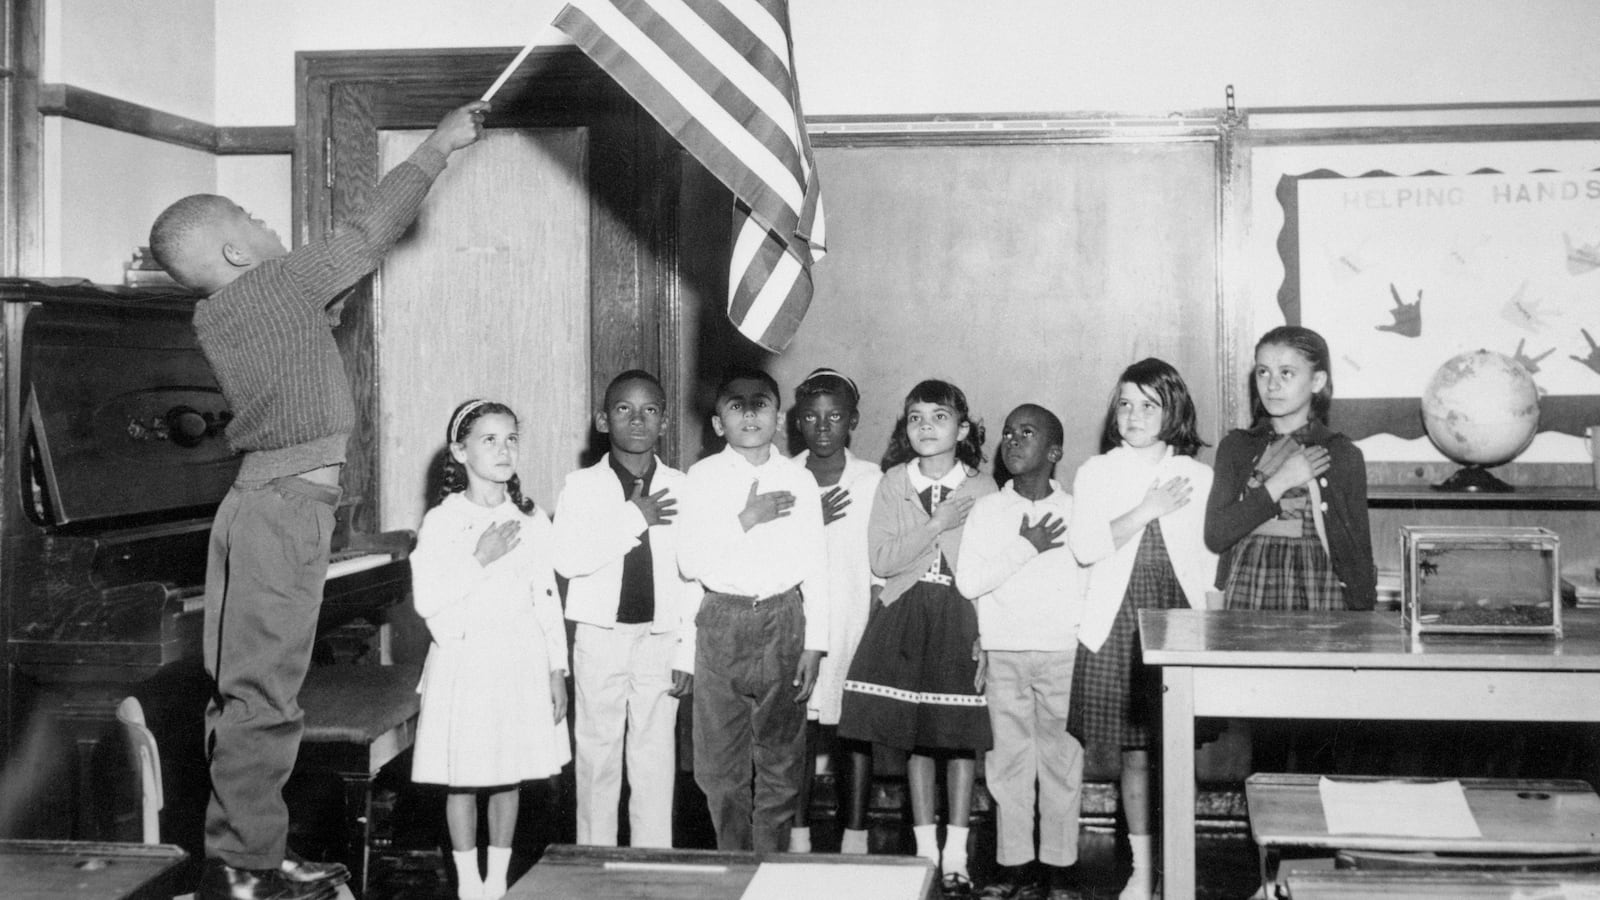 A third grade class recites the "Pledge of Allegiance" at Franklin Elementary School, which is now Franklin Fine Arts Academy, in September 1963